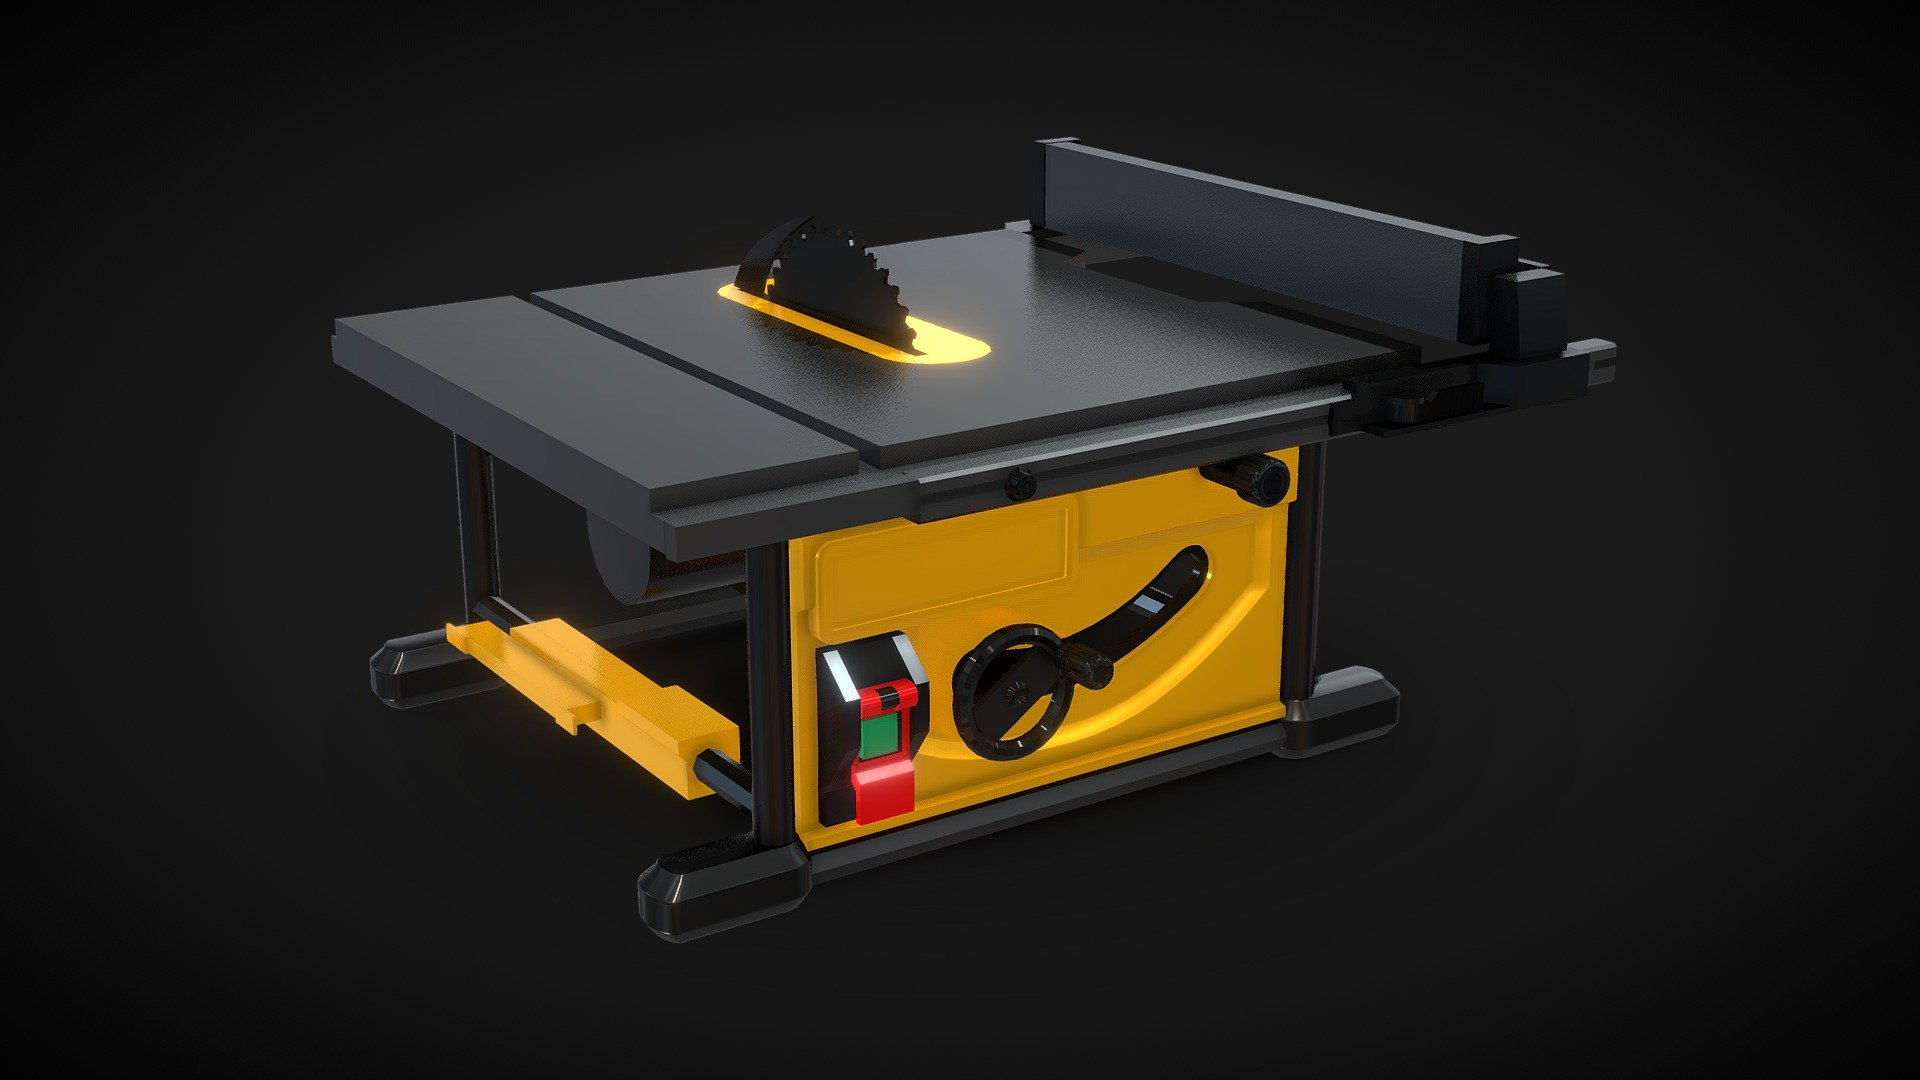 This is a concept Table saw, low poly 3D model 3d model